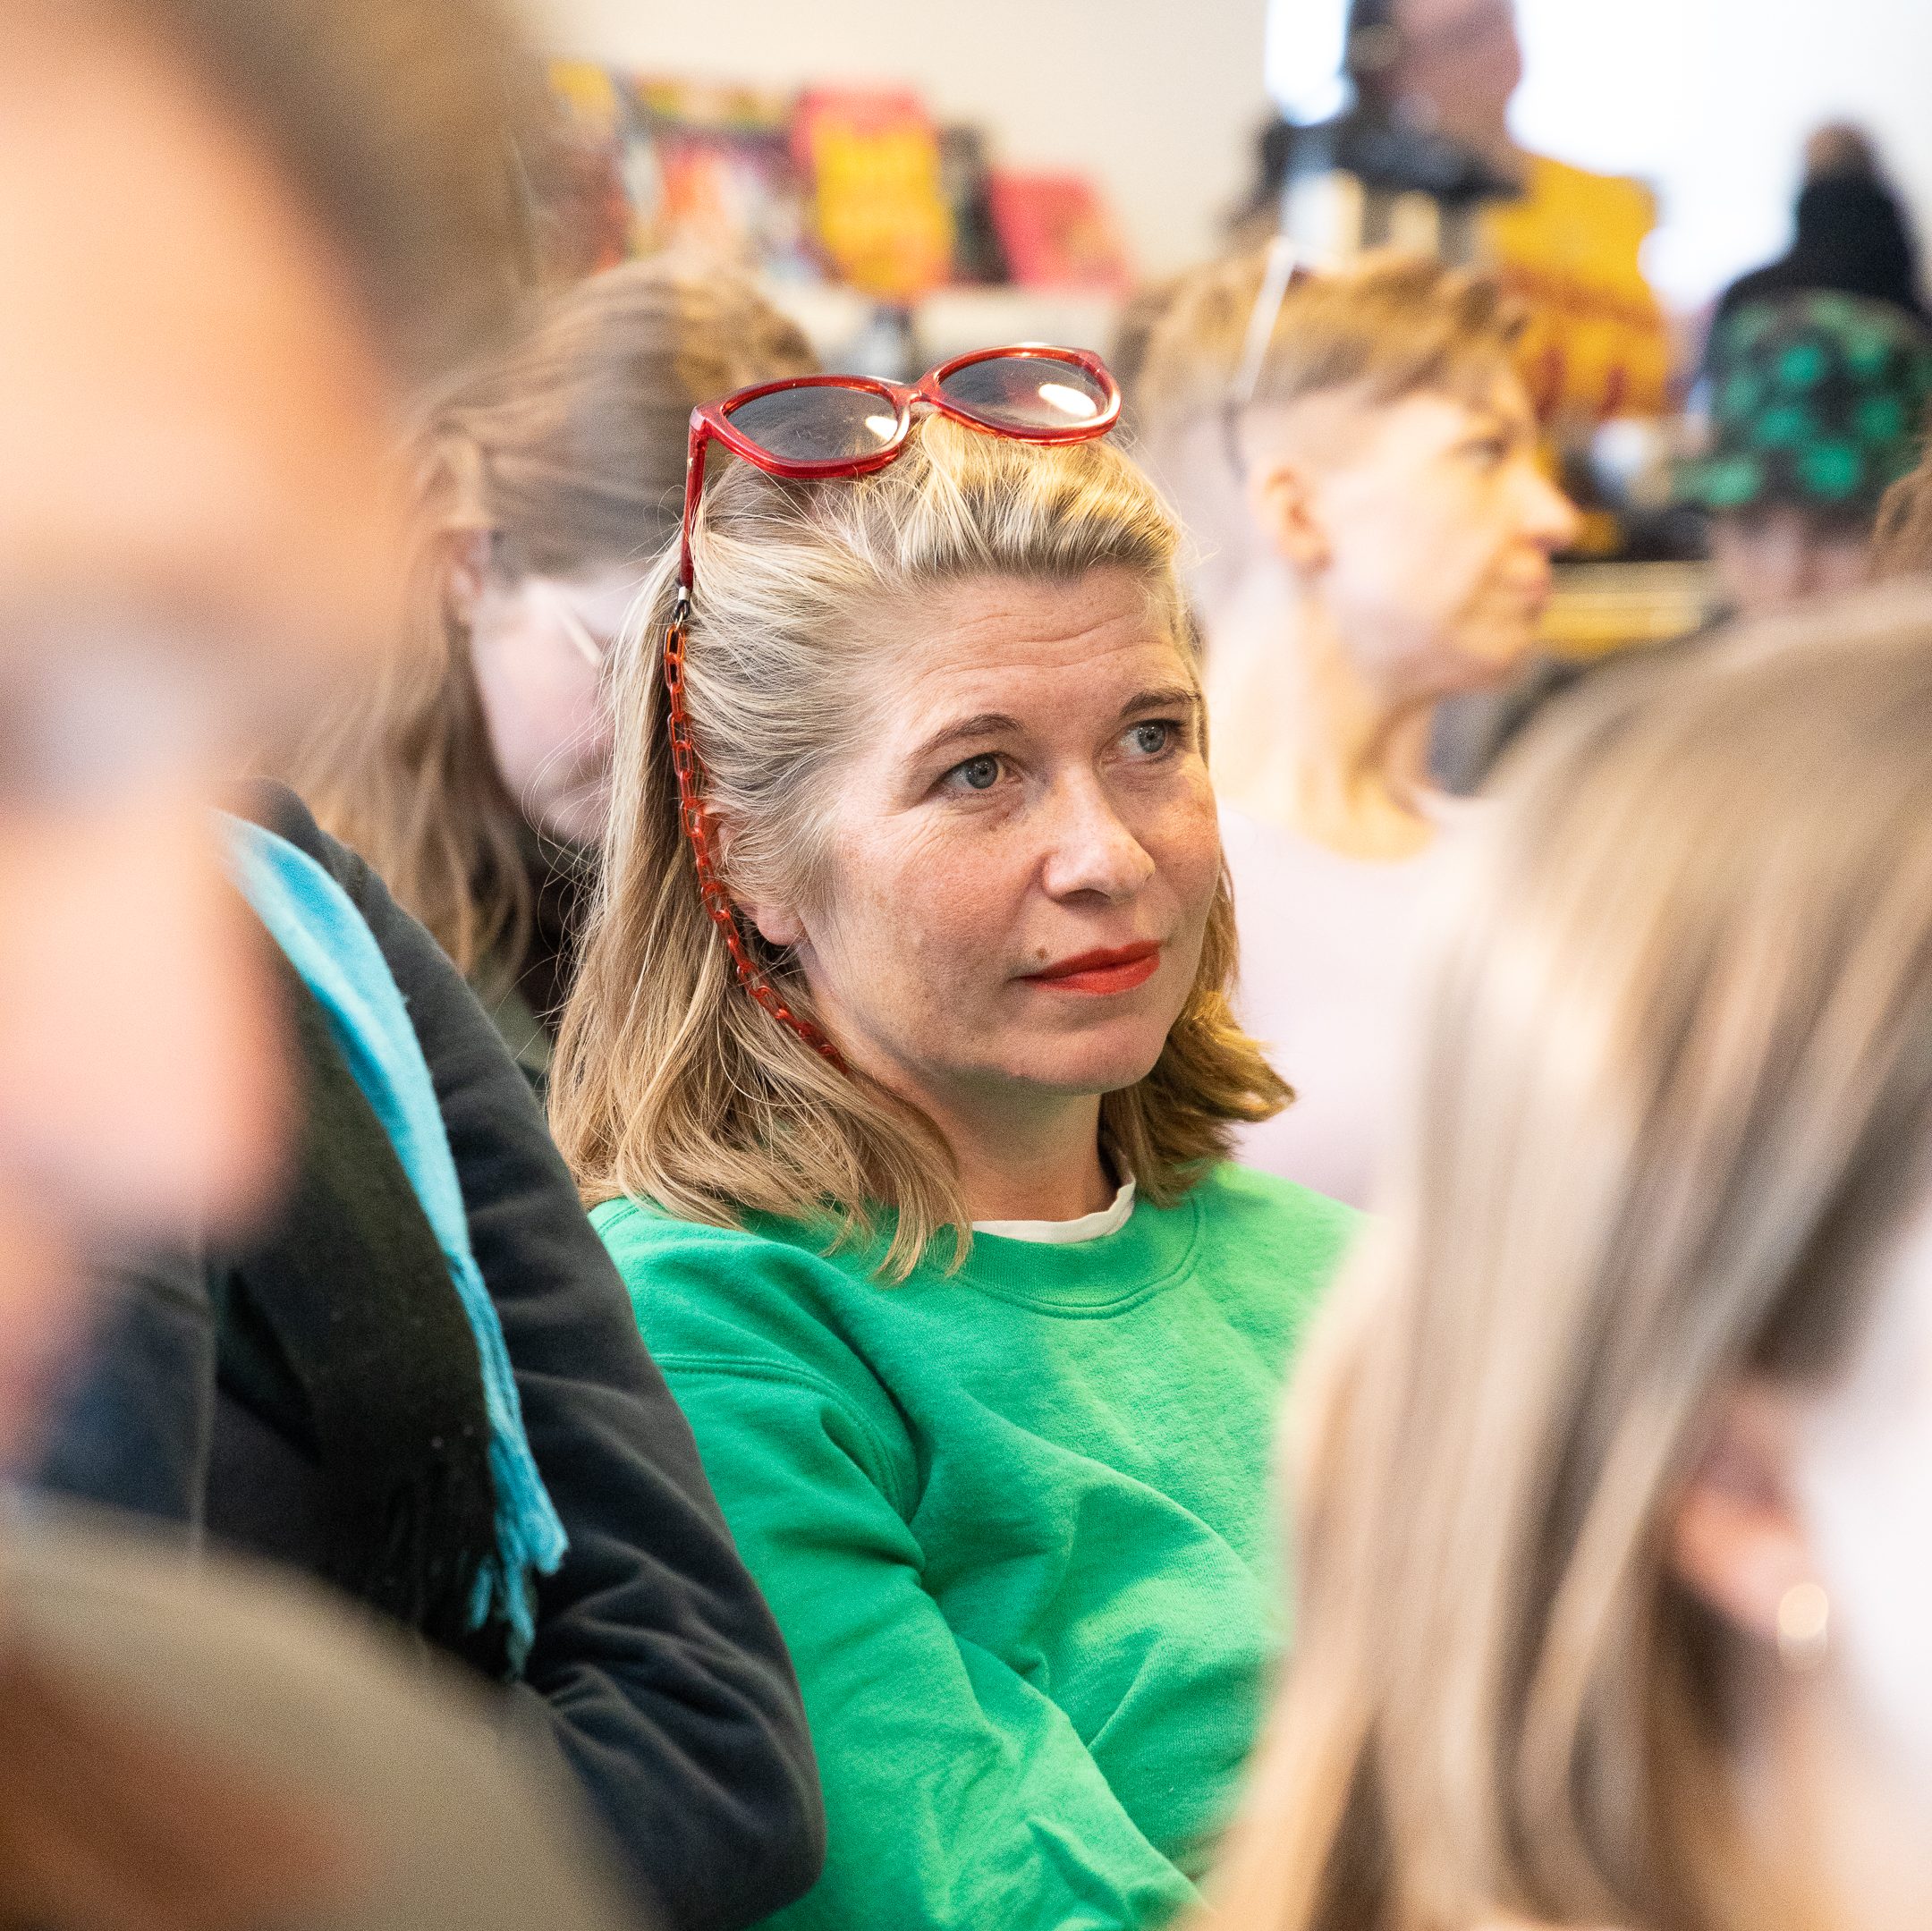 A blonde woman in a green sweater sits in a crowd of people. She has red sunglasses on her head and a red lipstick.